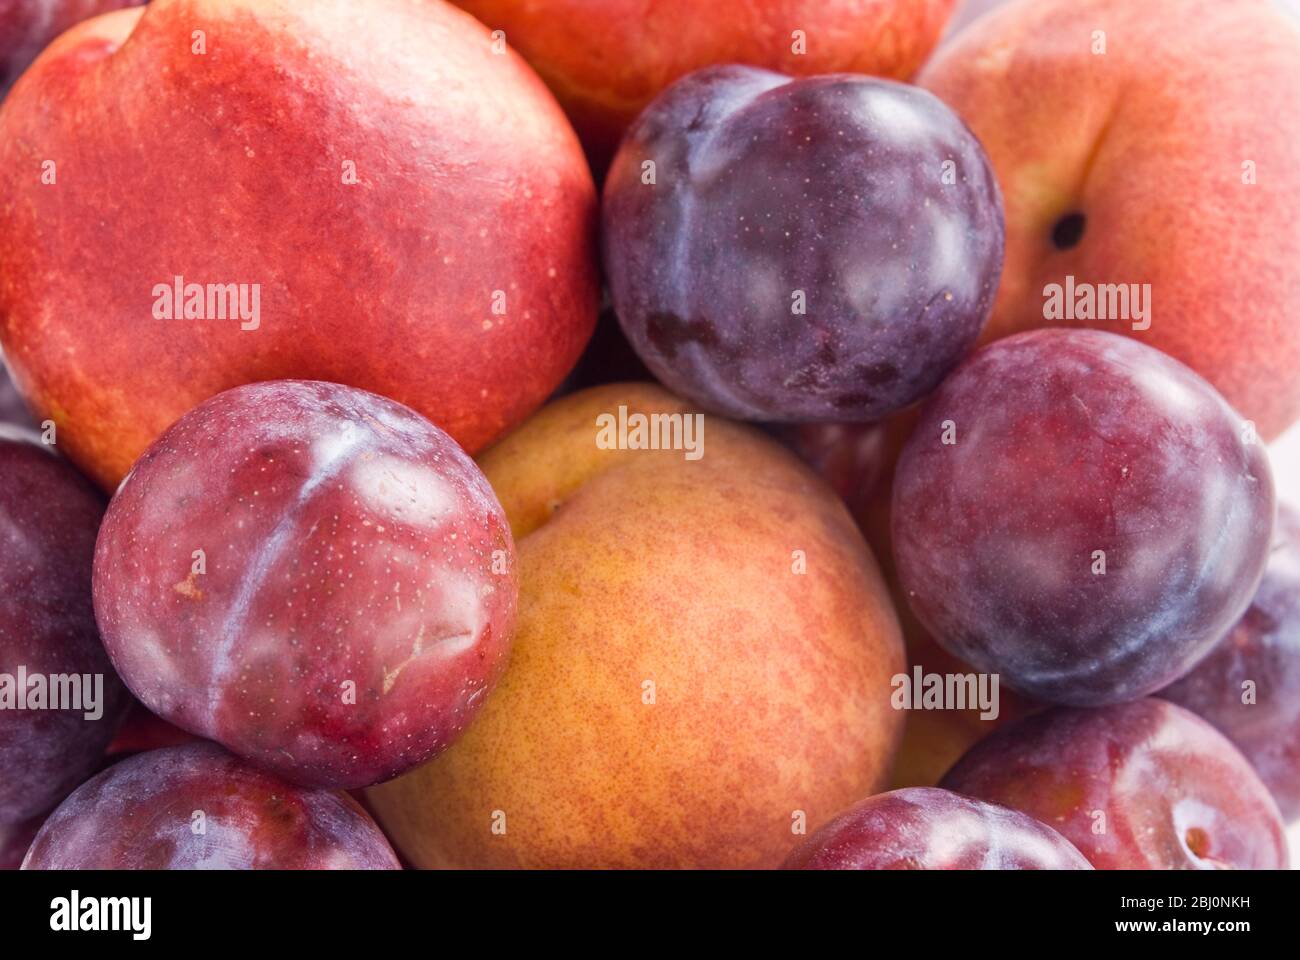 Massed plums, peaches, and nectarines - Stock Photo